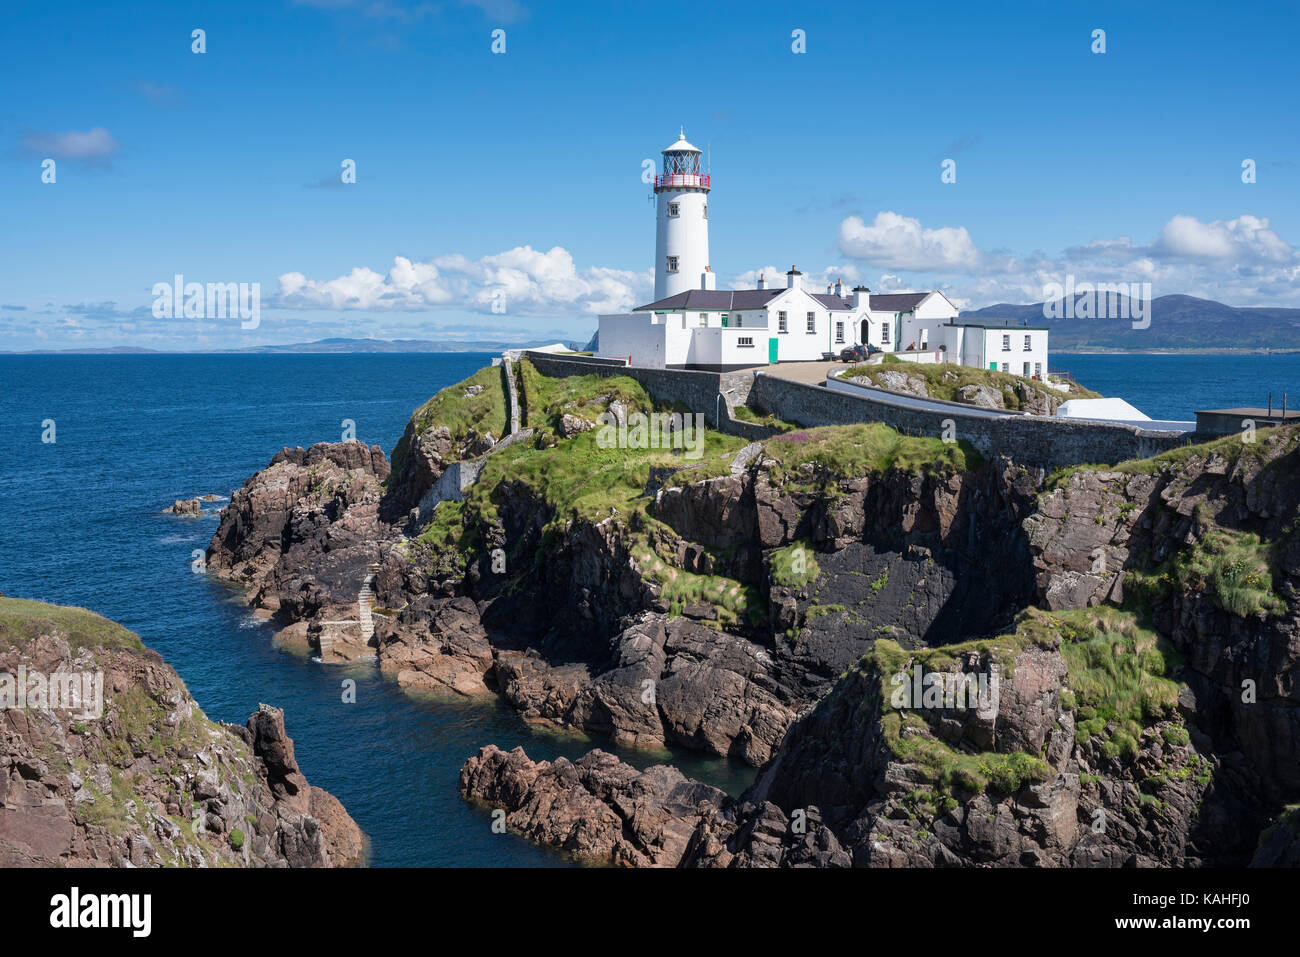 Lighthouse at Fanad Head, County Donegal, Ireland Stock Photo